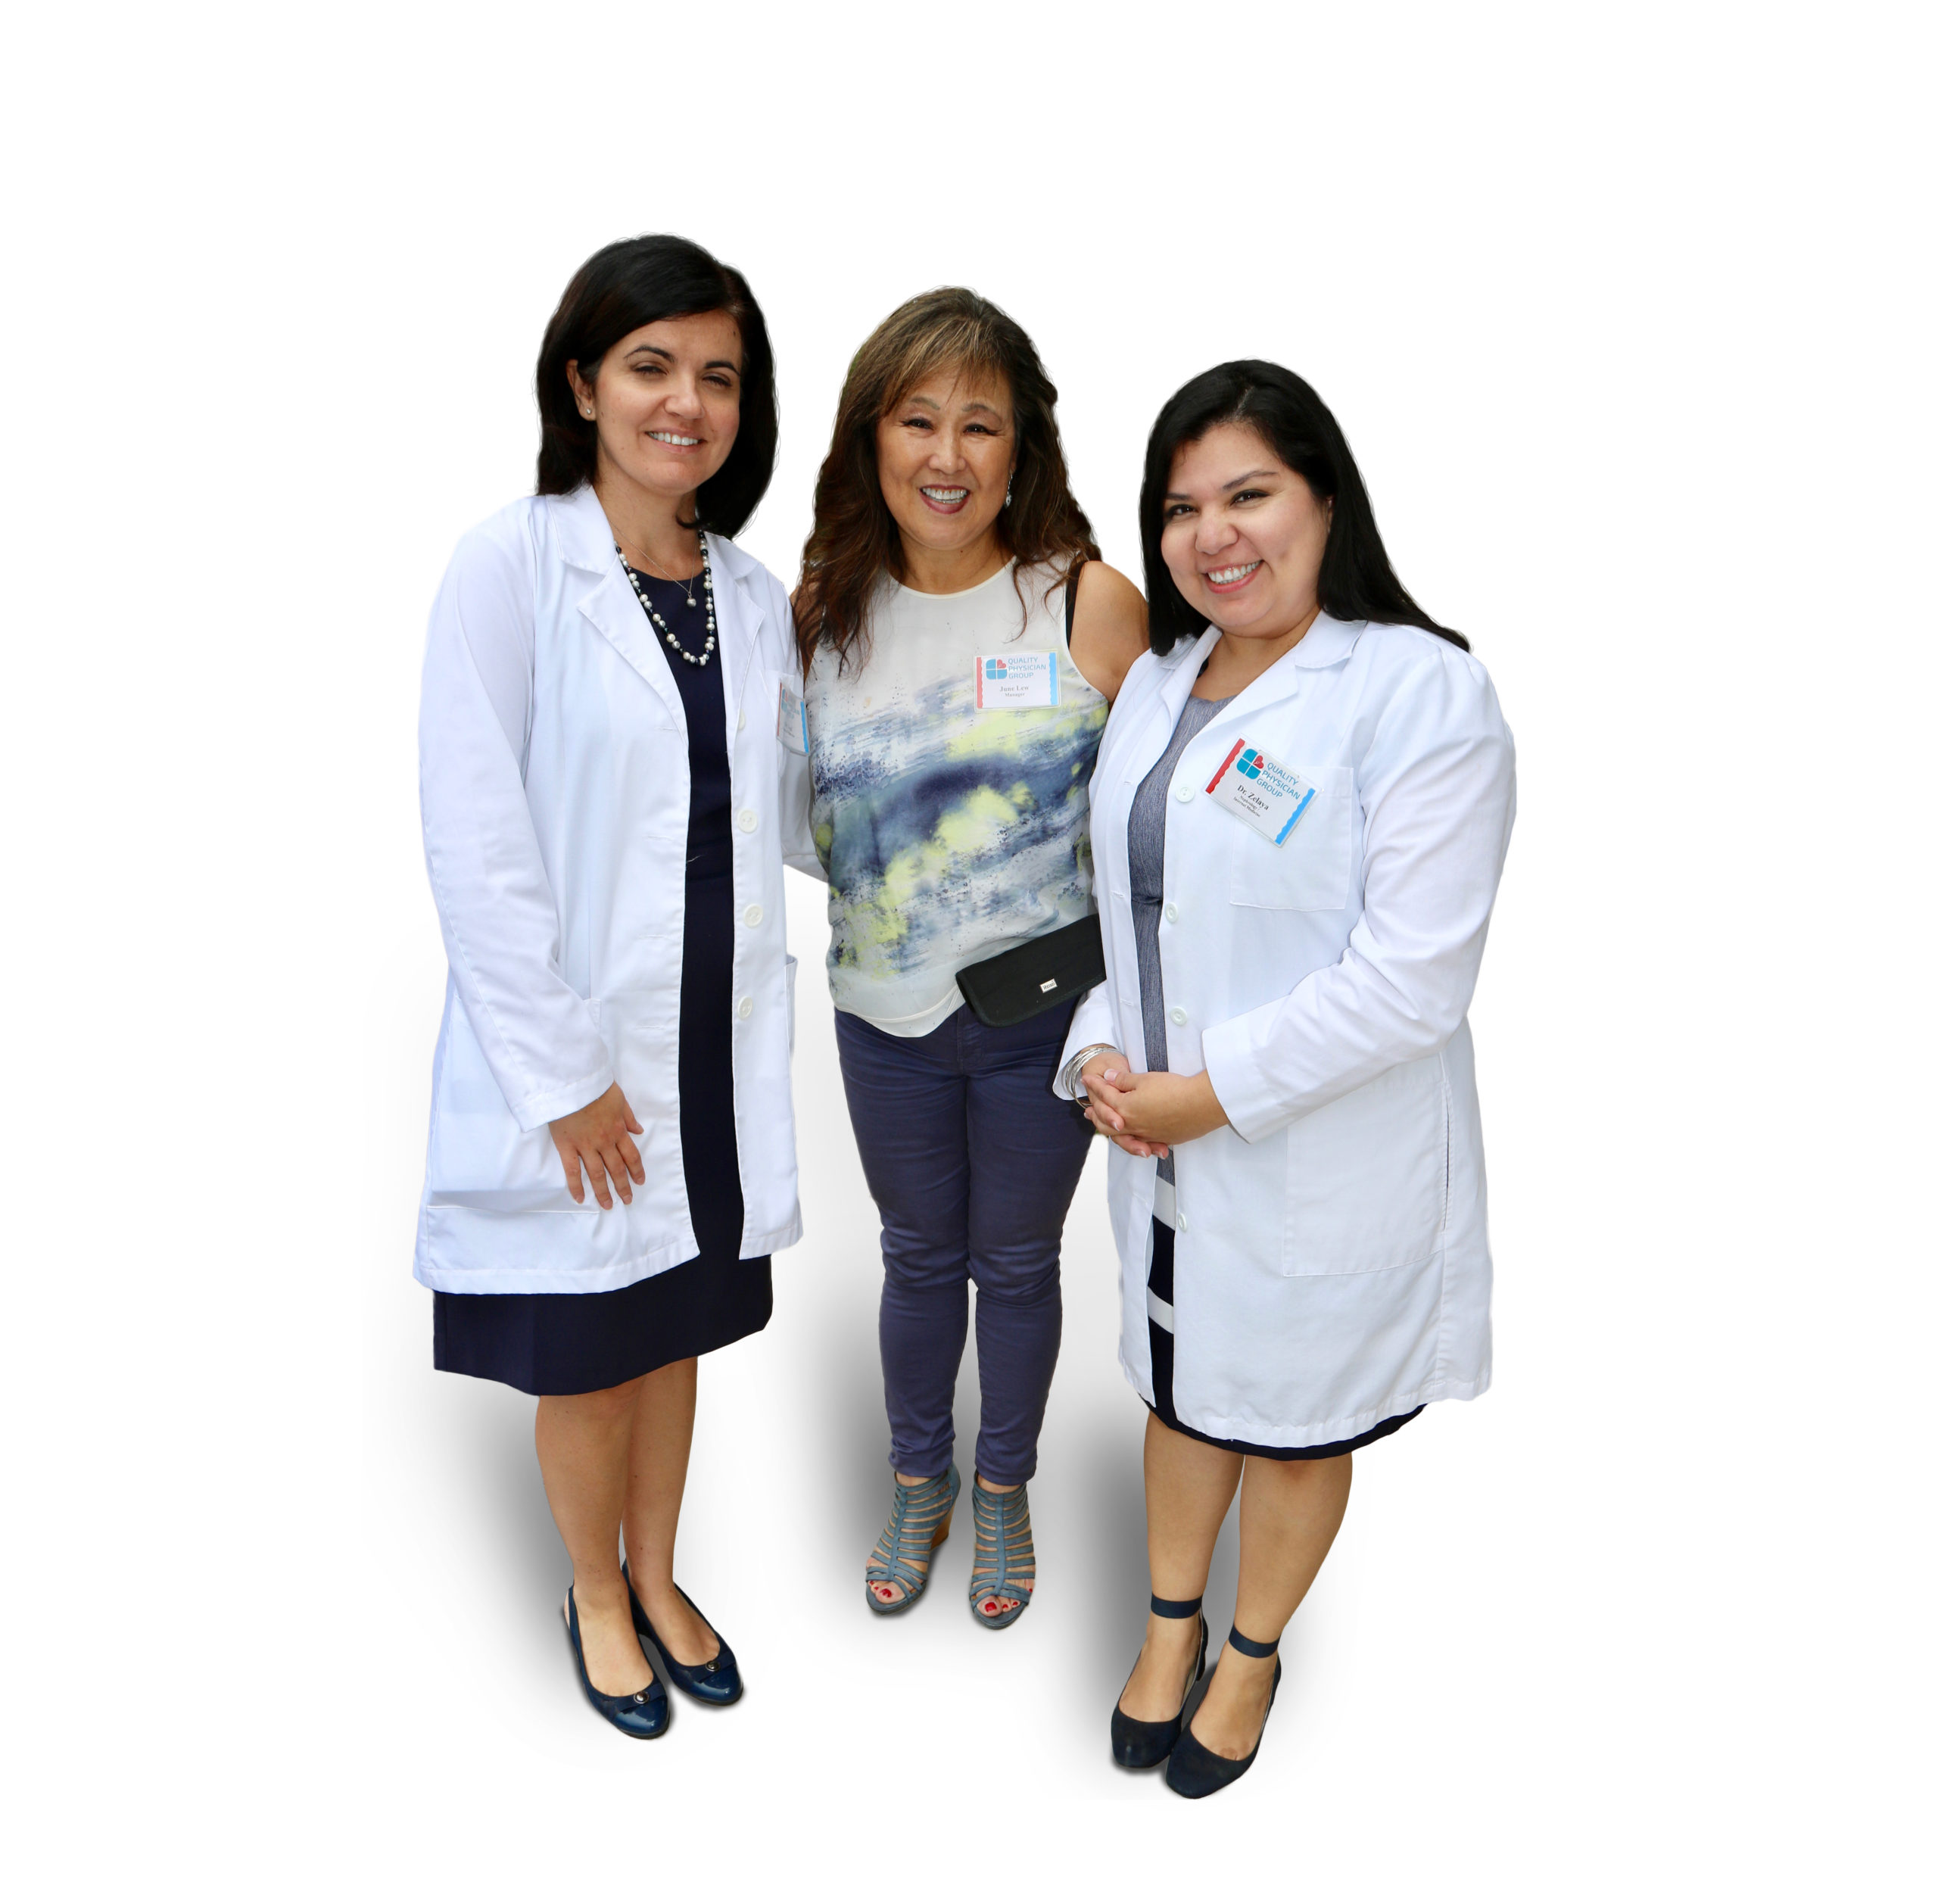 Three women in white lab coats standing next to each other.